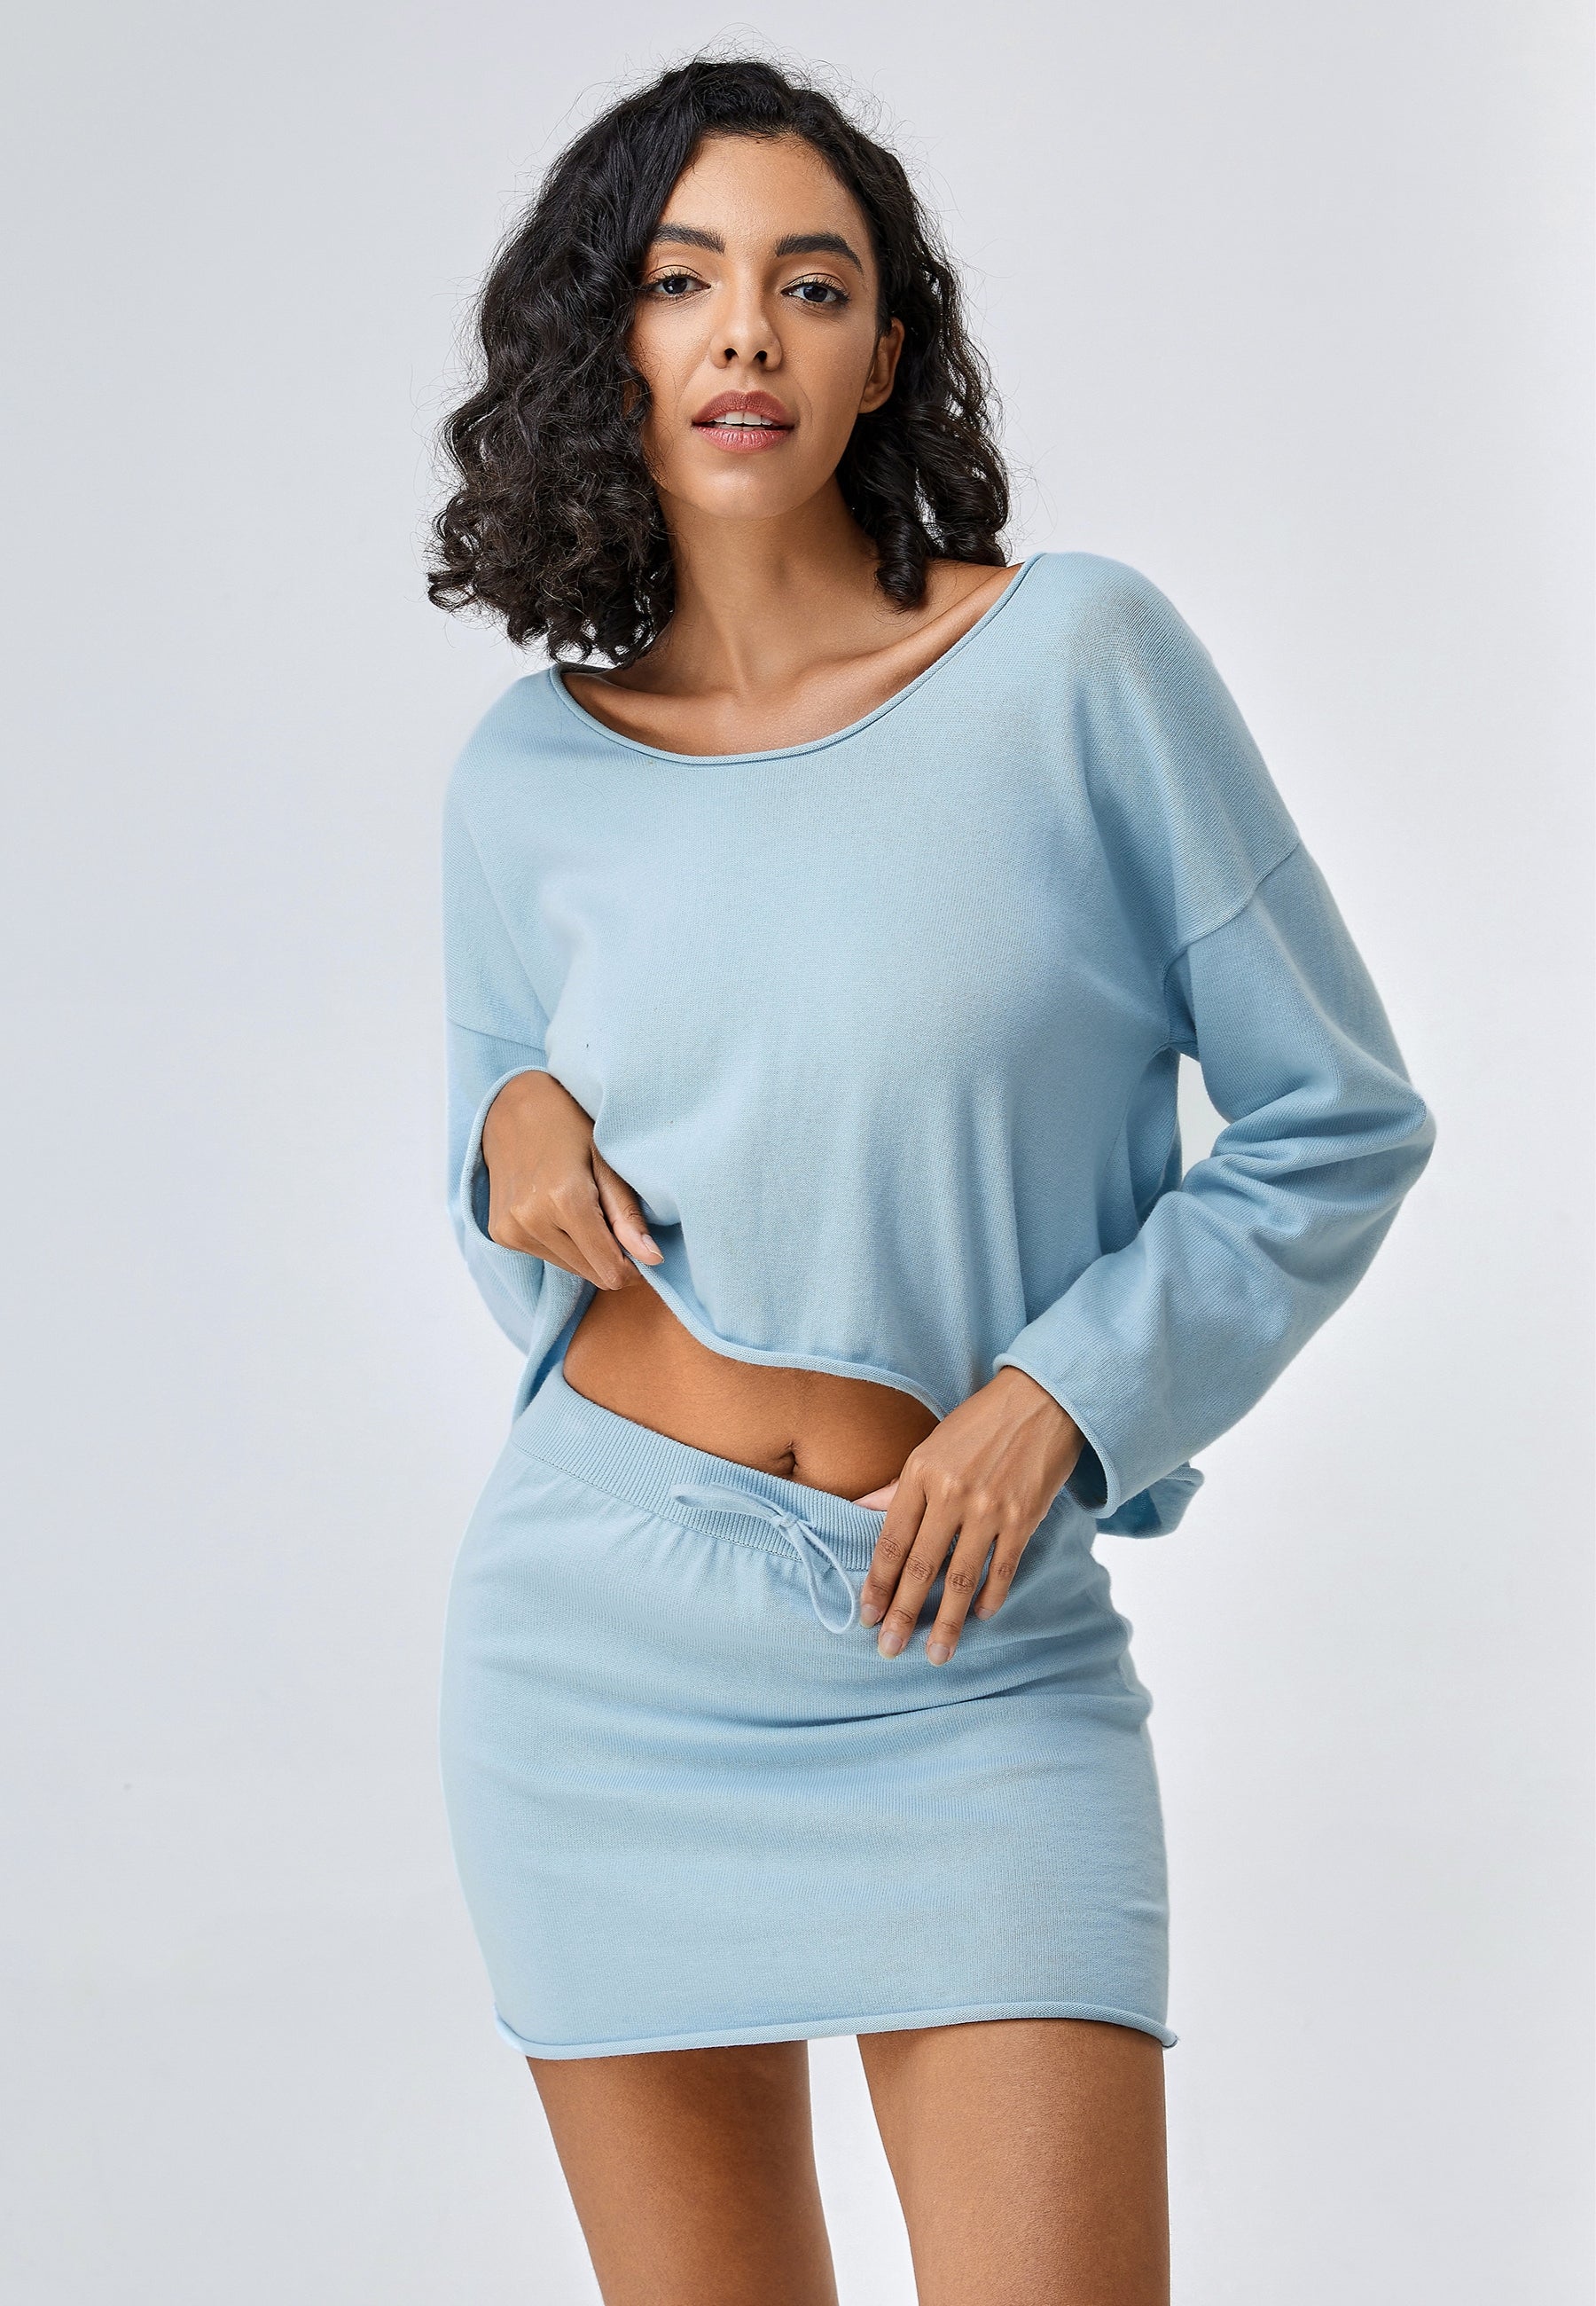 Women’s Off-The-Shoulder Top & Mini Skirt Two-Piece Leisure Set